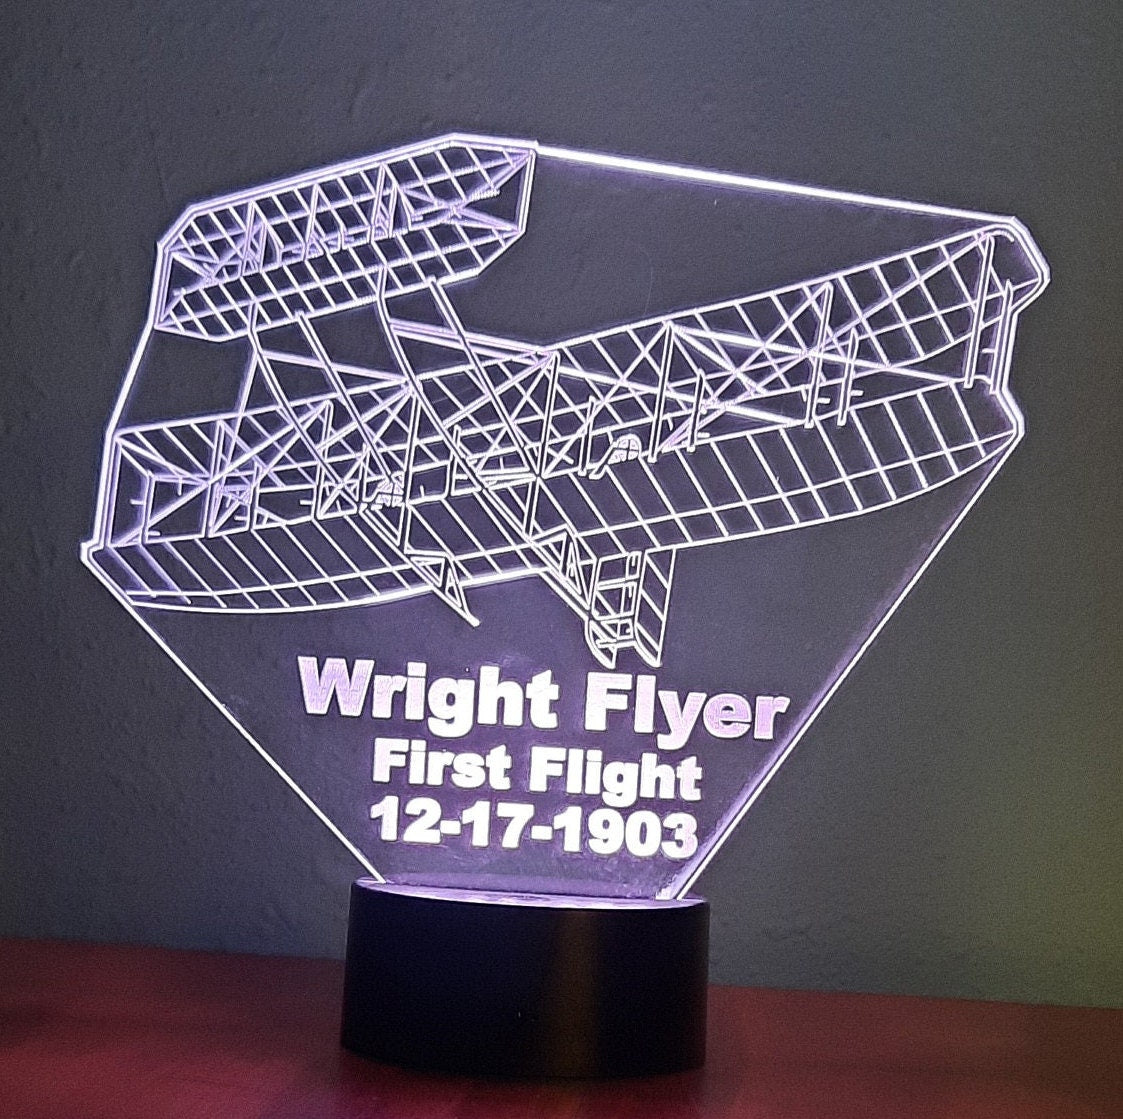 Awesome "First Flight - The Wright Flyer" 3D LED Lamp (1289) - Free Shipping